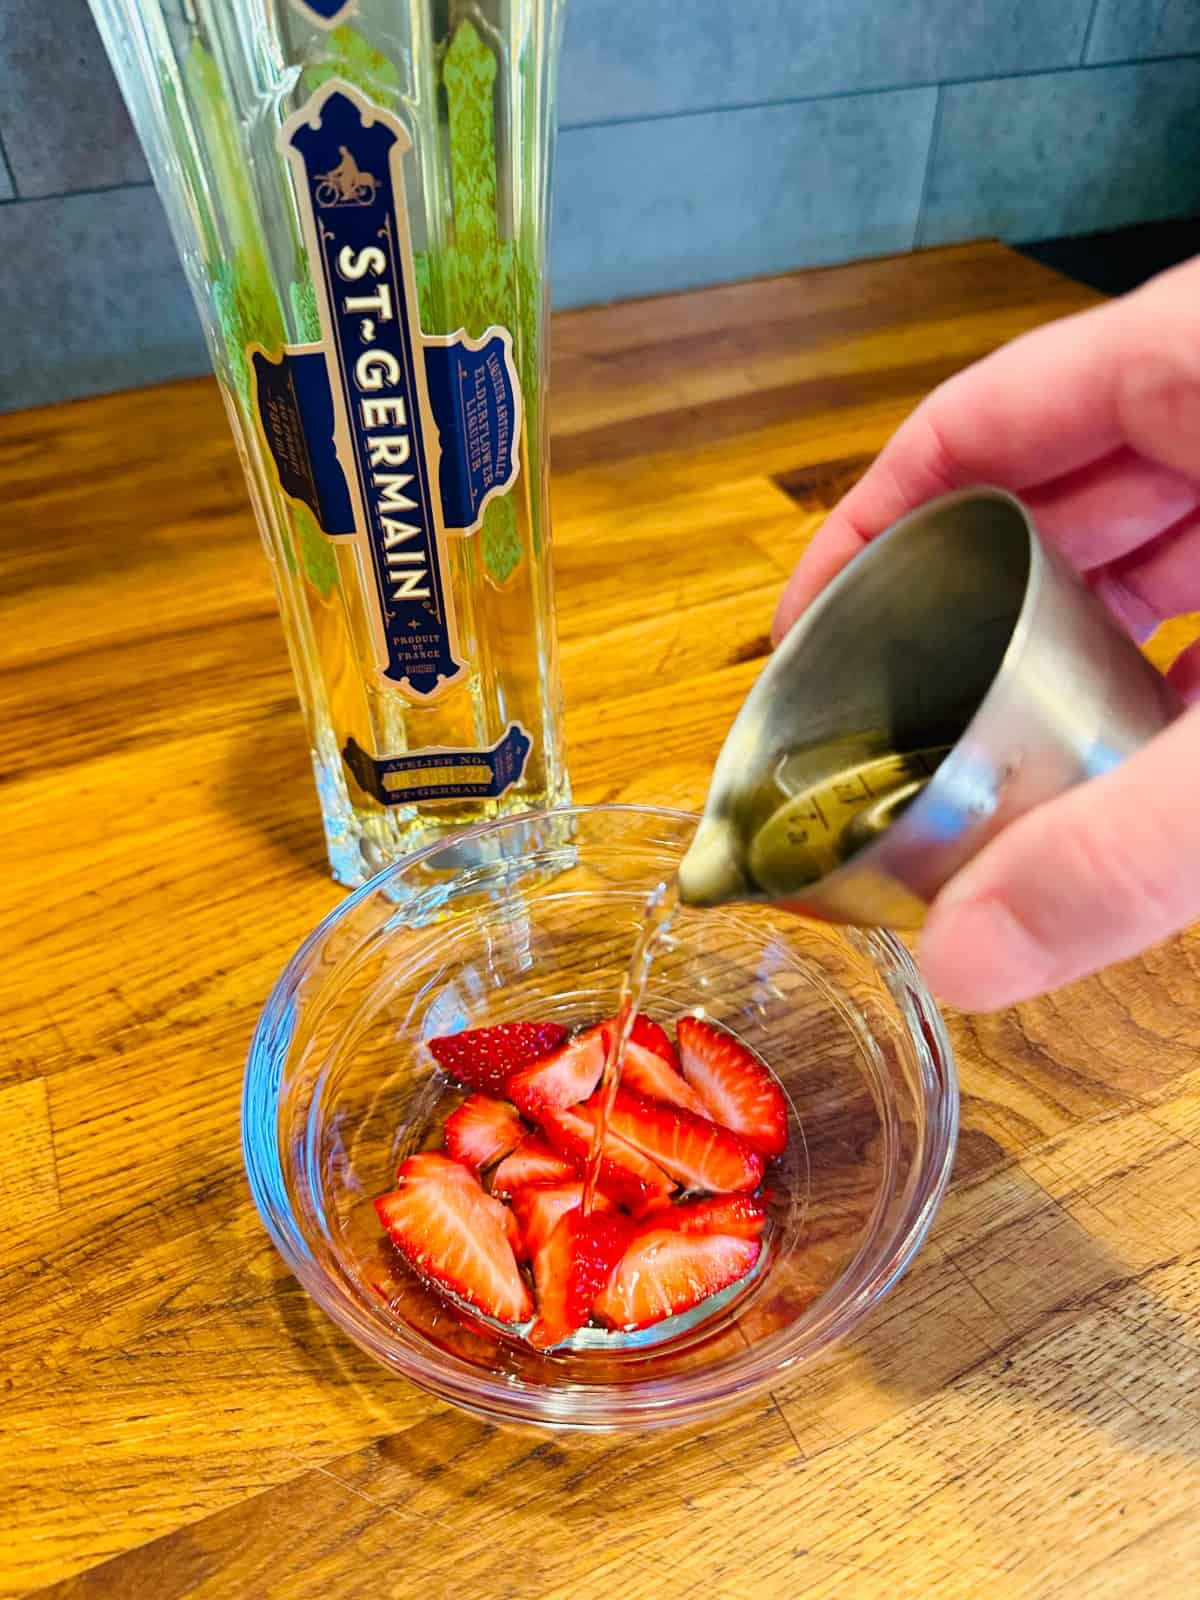 Pale golden liquid being poured from a steel measuring jigger over sliced strawberries in a small glass bowl next to a bottle of St. Germain.